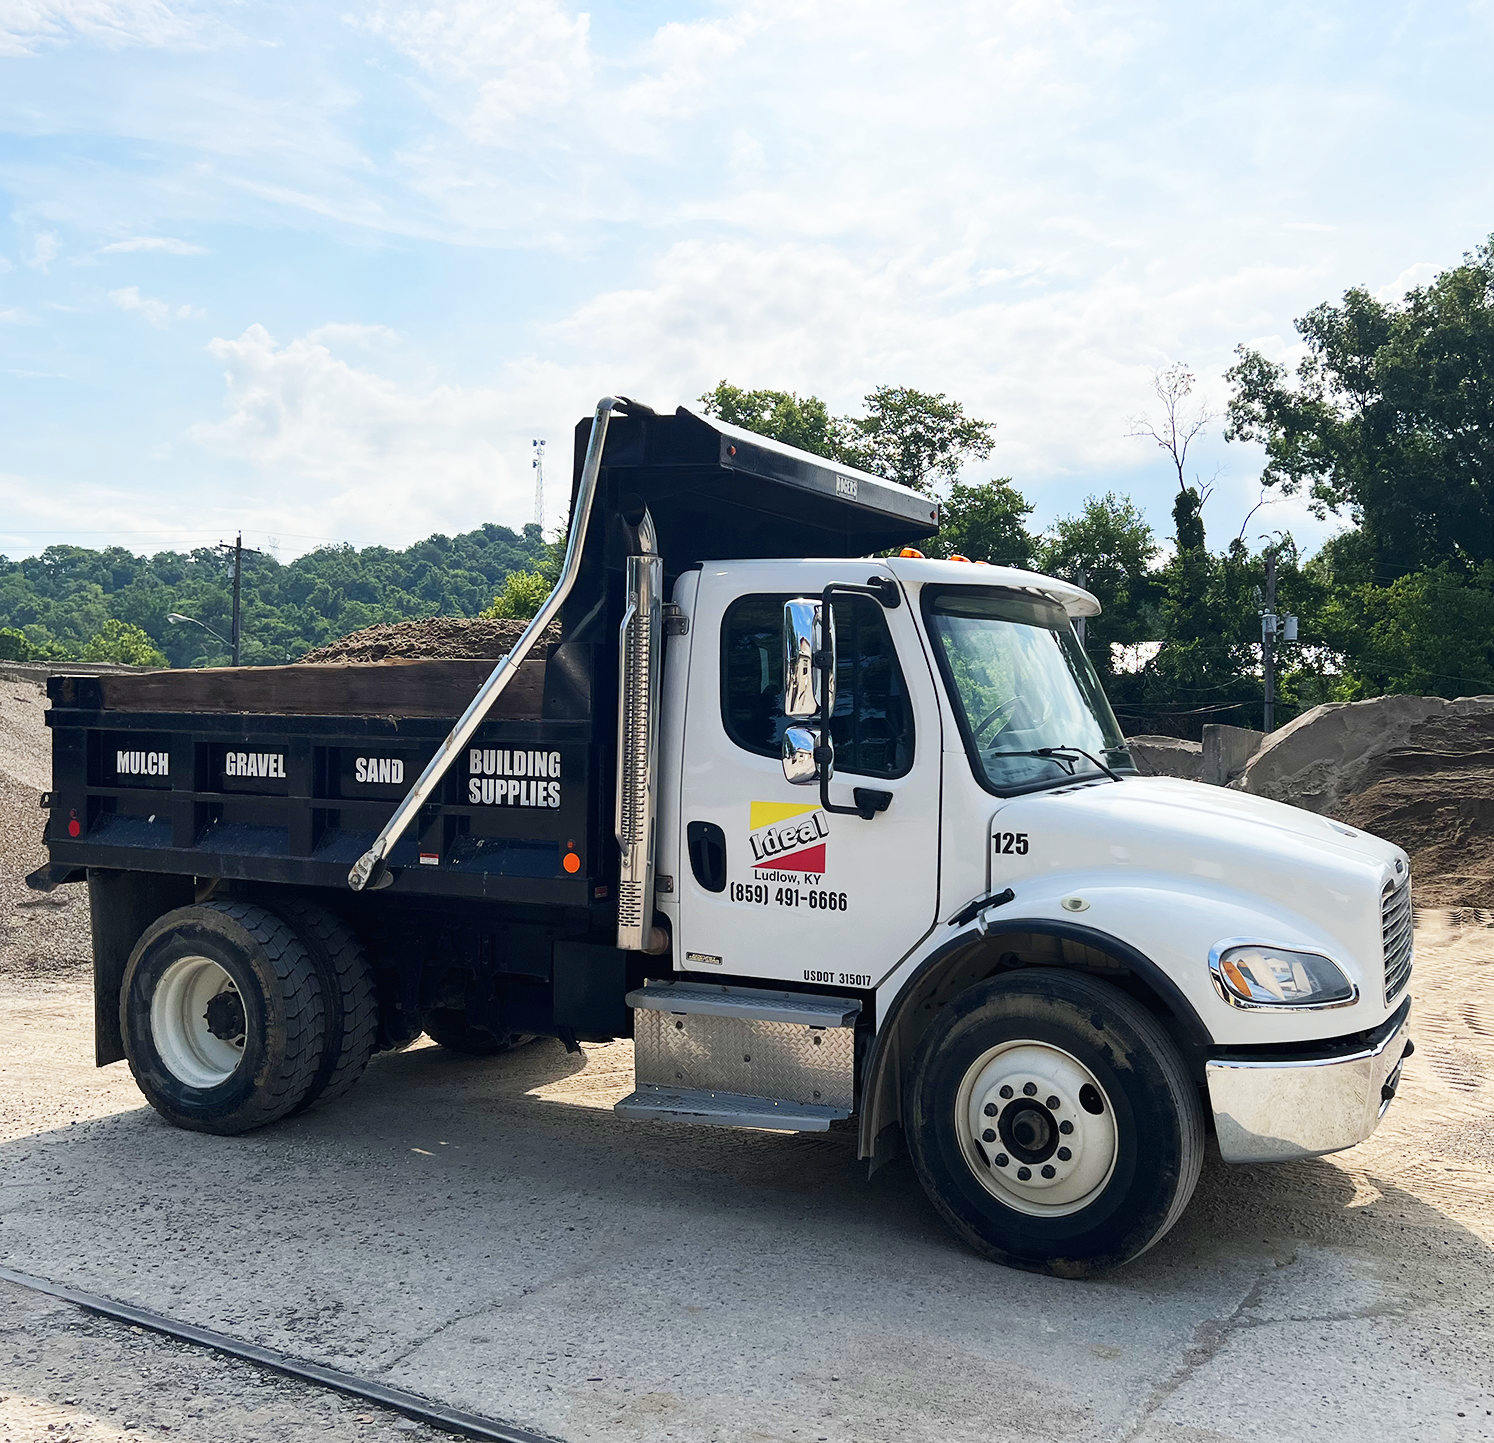 Ideal Supplies is a concrete company that delivers to your worksite or home.